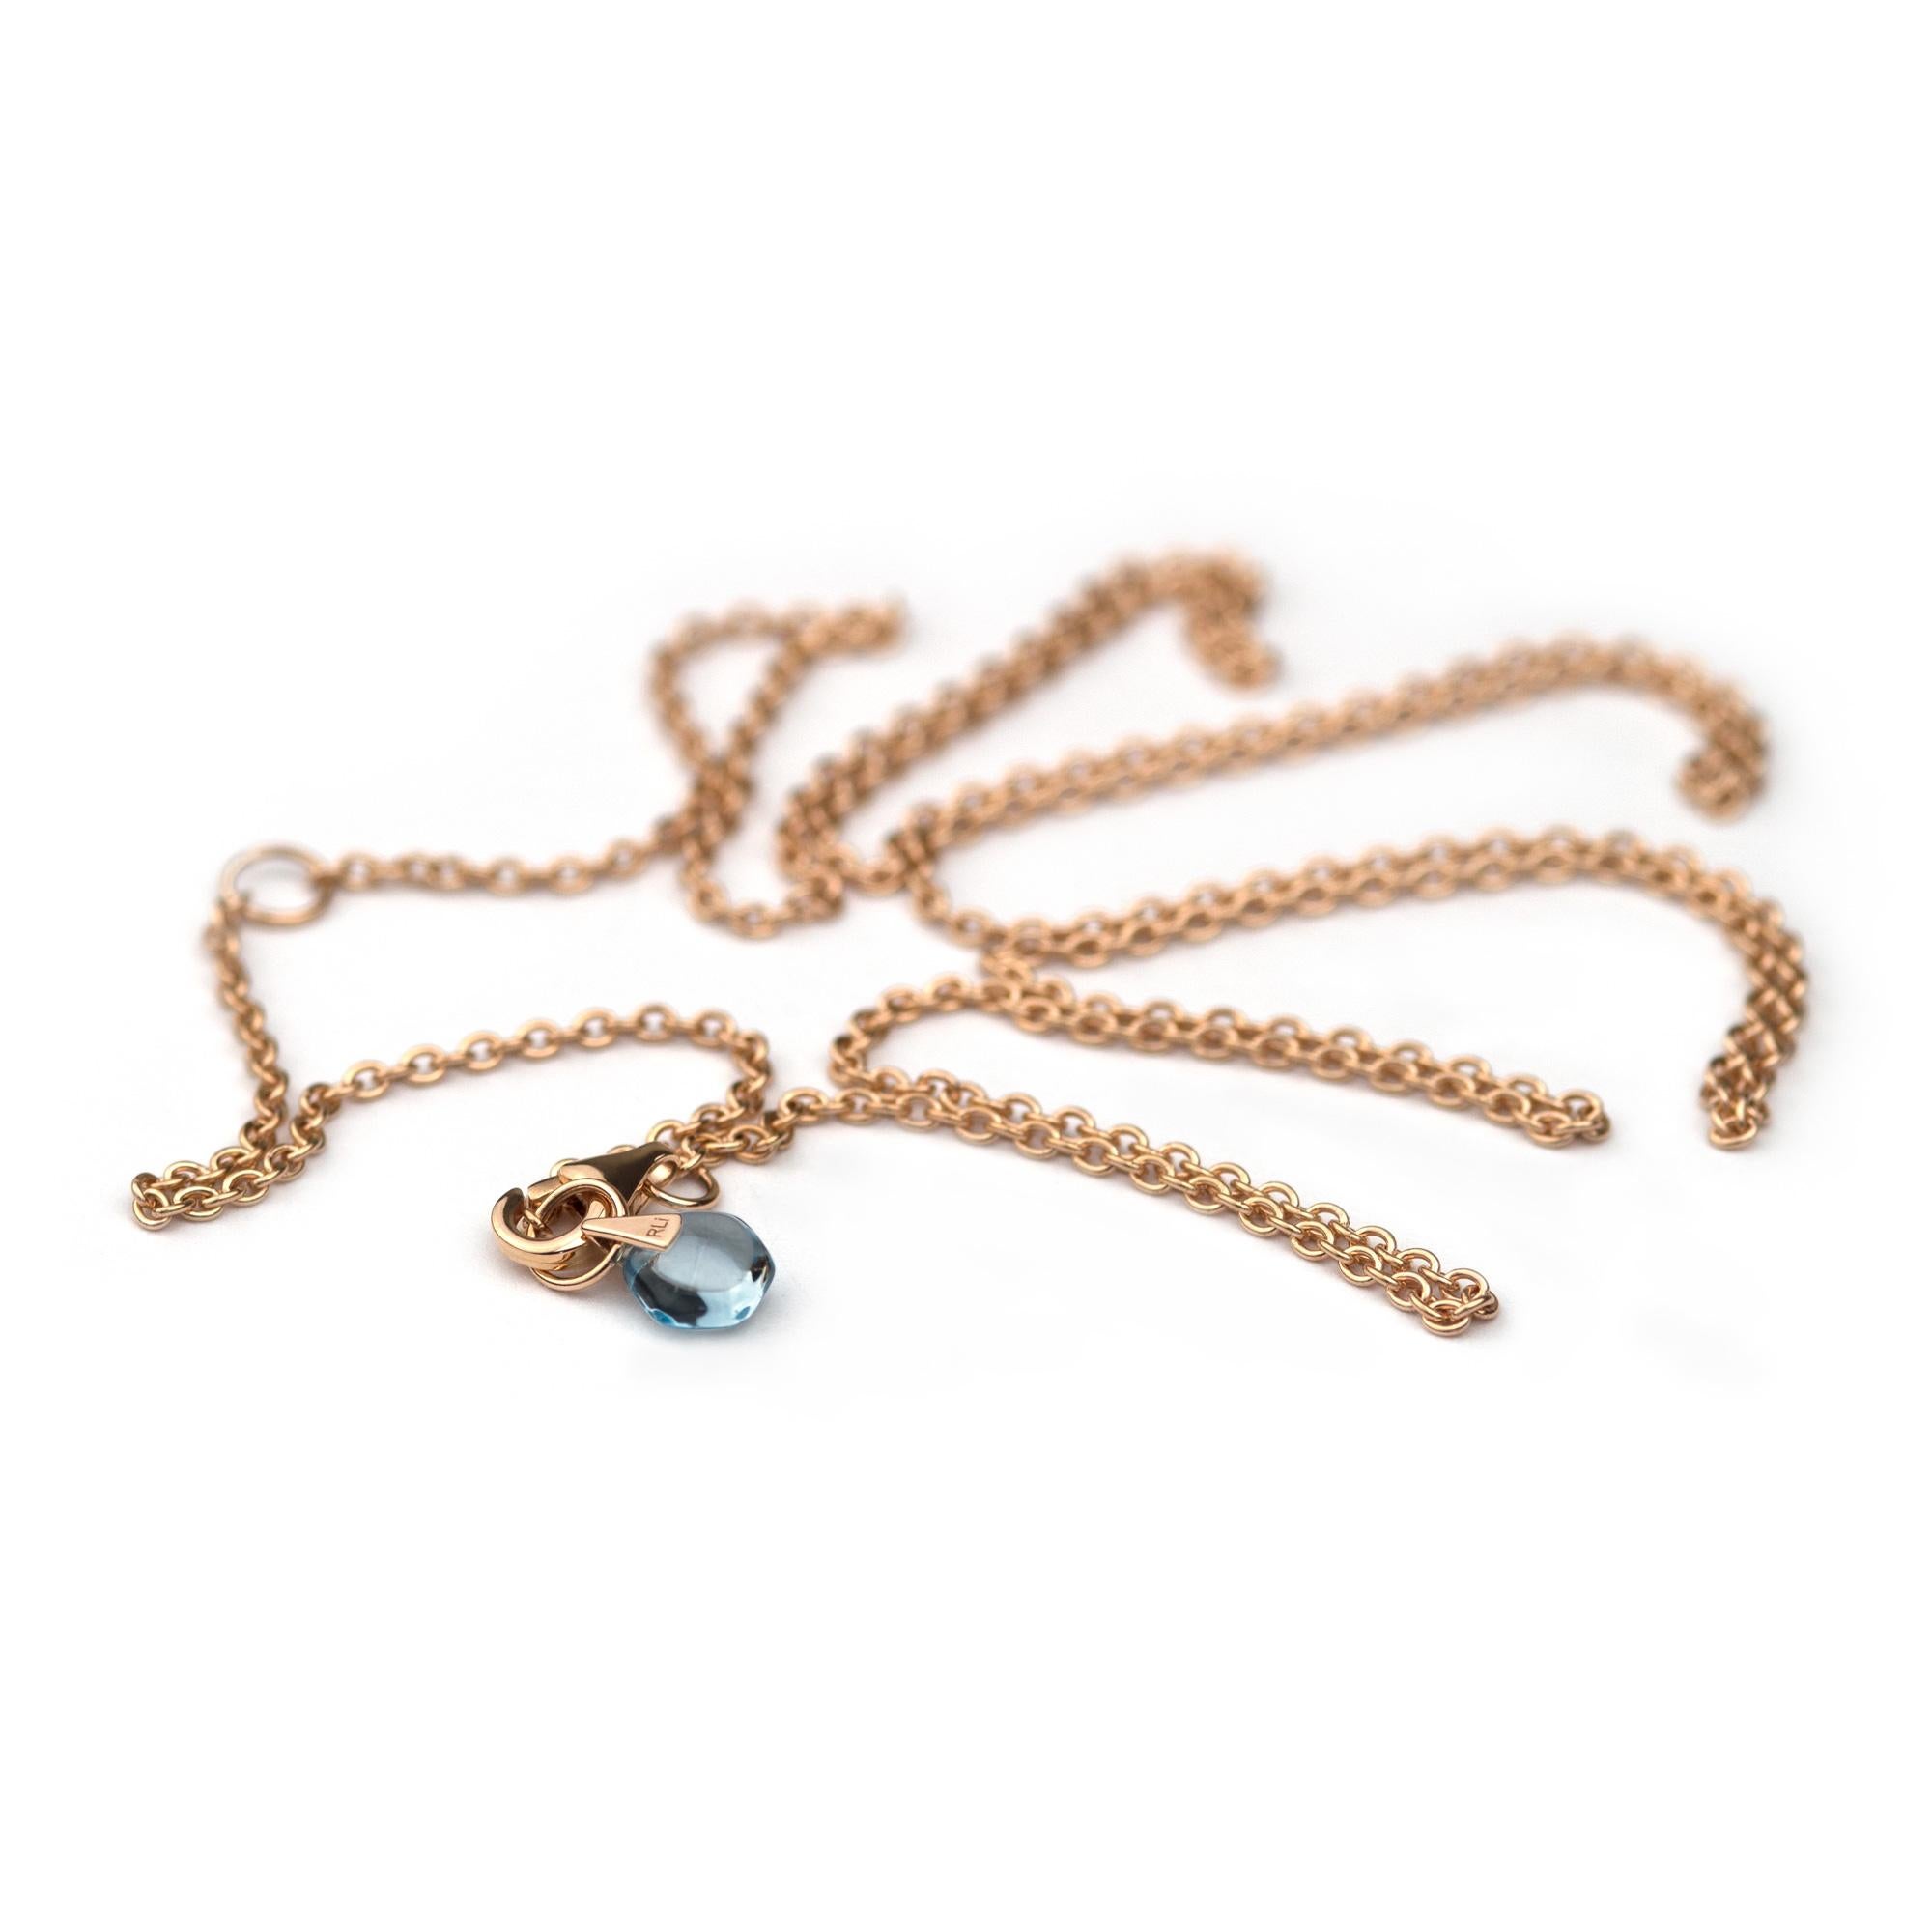 Rebecca Li designs mindfulness.  
This long gold chain is from her popular Crystal Link Collection.

Chain Metal Type: 18K Rose Gold
Chain Length: 20 - 23 inch
Chain Thickness: 1.5 mm
Chain Clasp Type: Lobster Clasp